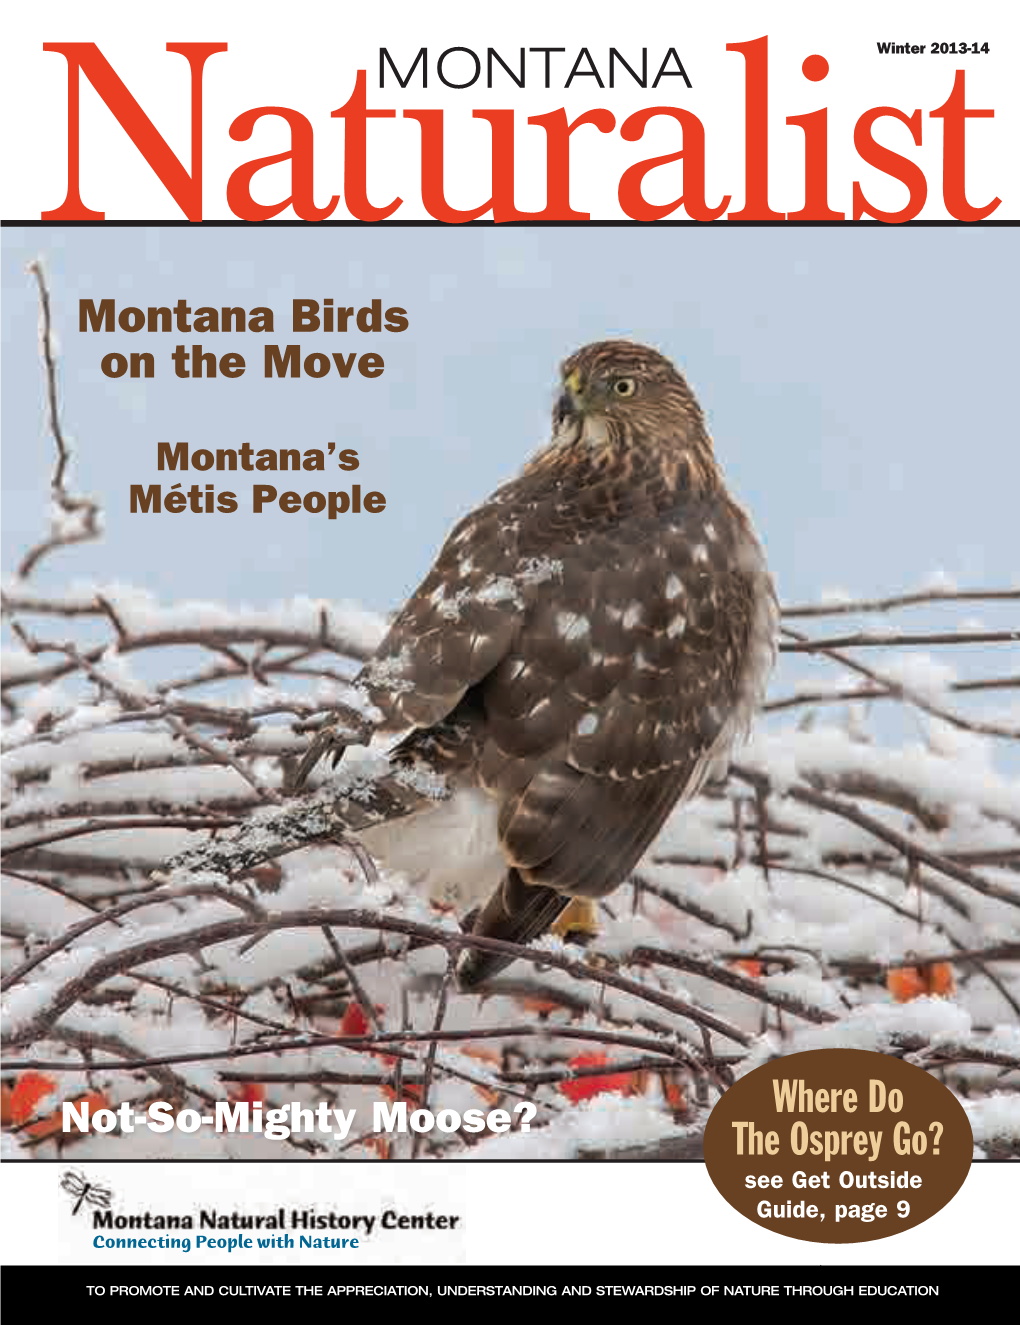 Montana Naturalist to Promote and Cultivate the Appreciation, Understanding and Stewardship of Nature Through Education